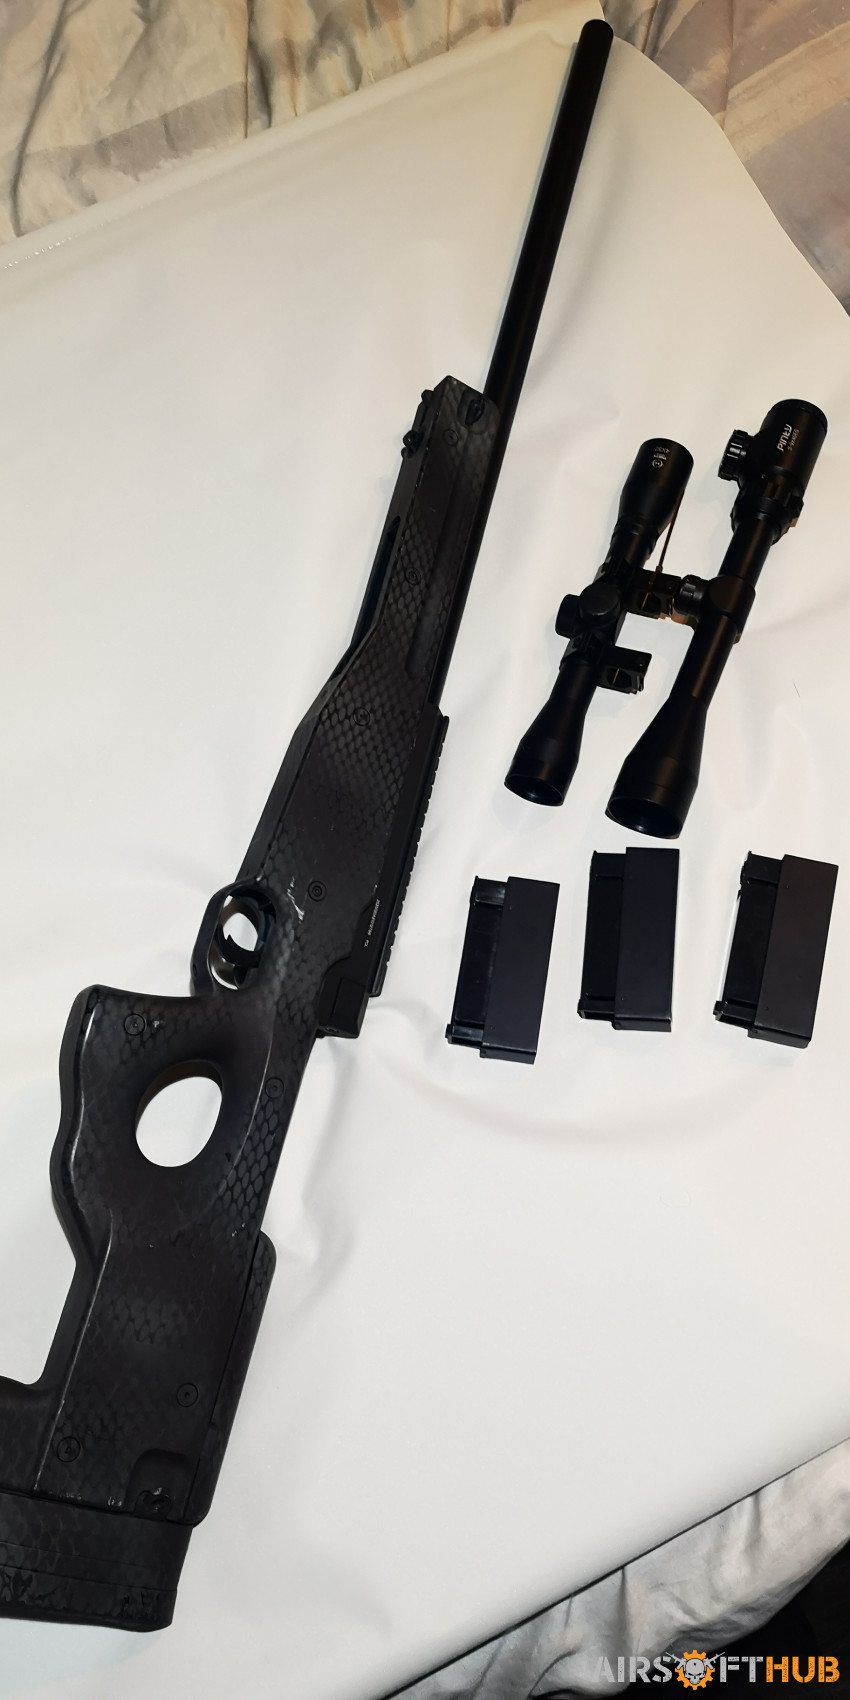 Swaps/Trades for LMG - Used airsoft equipment